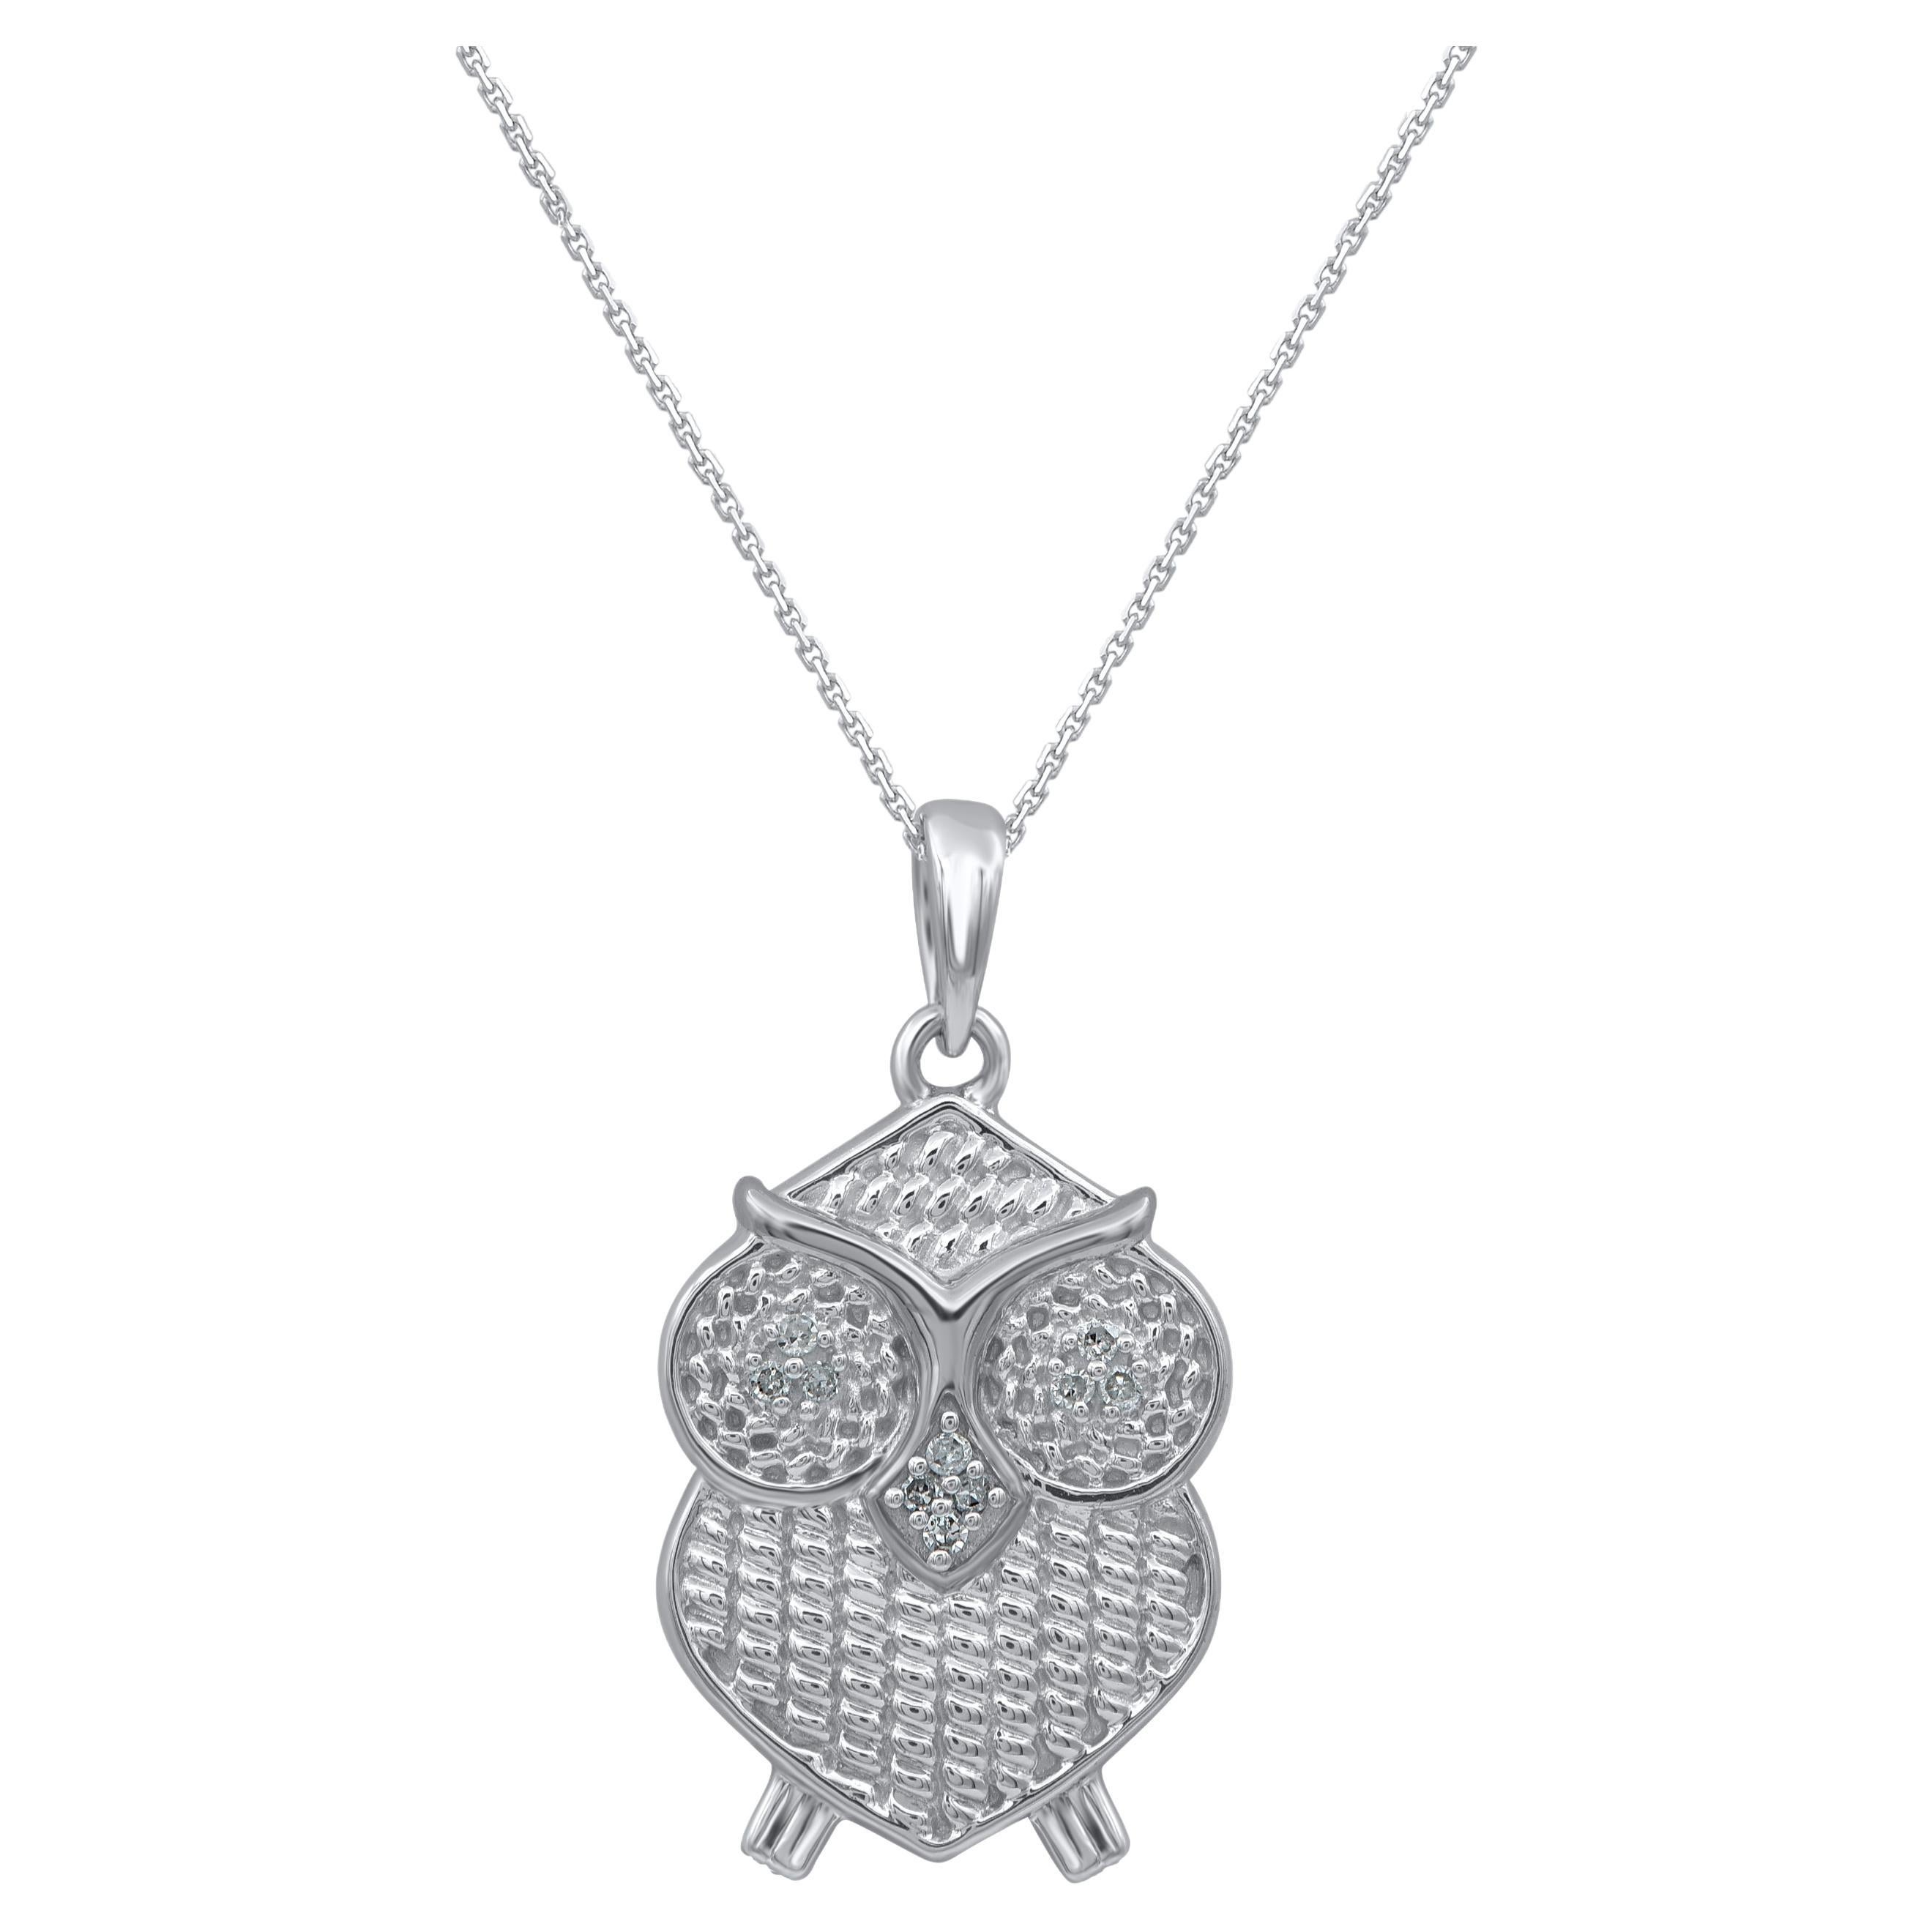 TJD 0.03 Carat Natural Round Diamond 14KT White Gold Owl Pendant Necklace For Sale